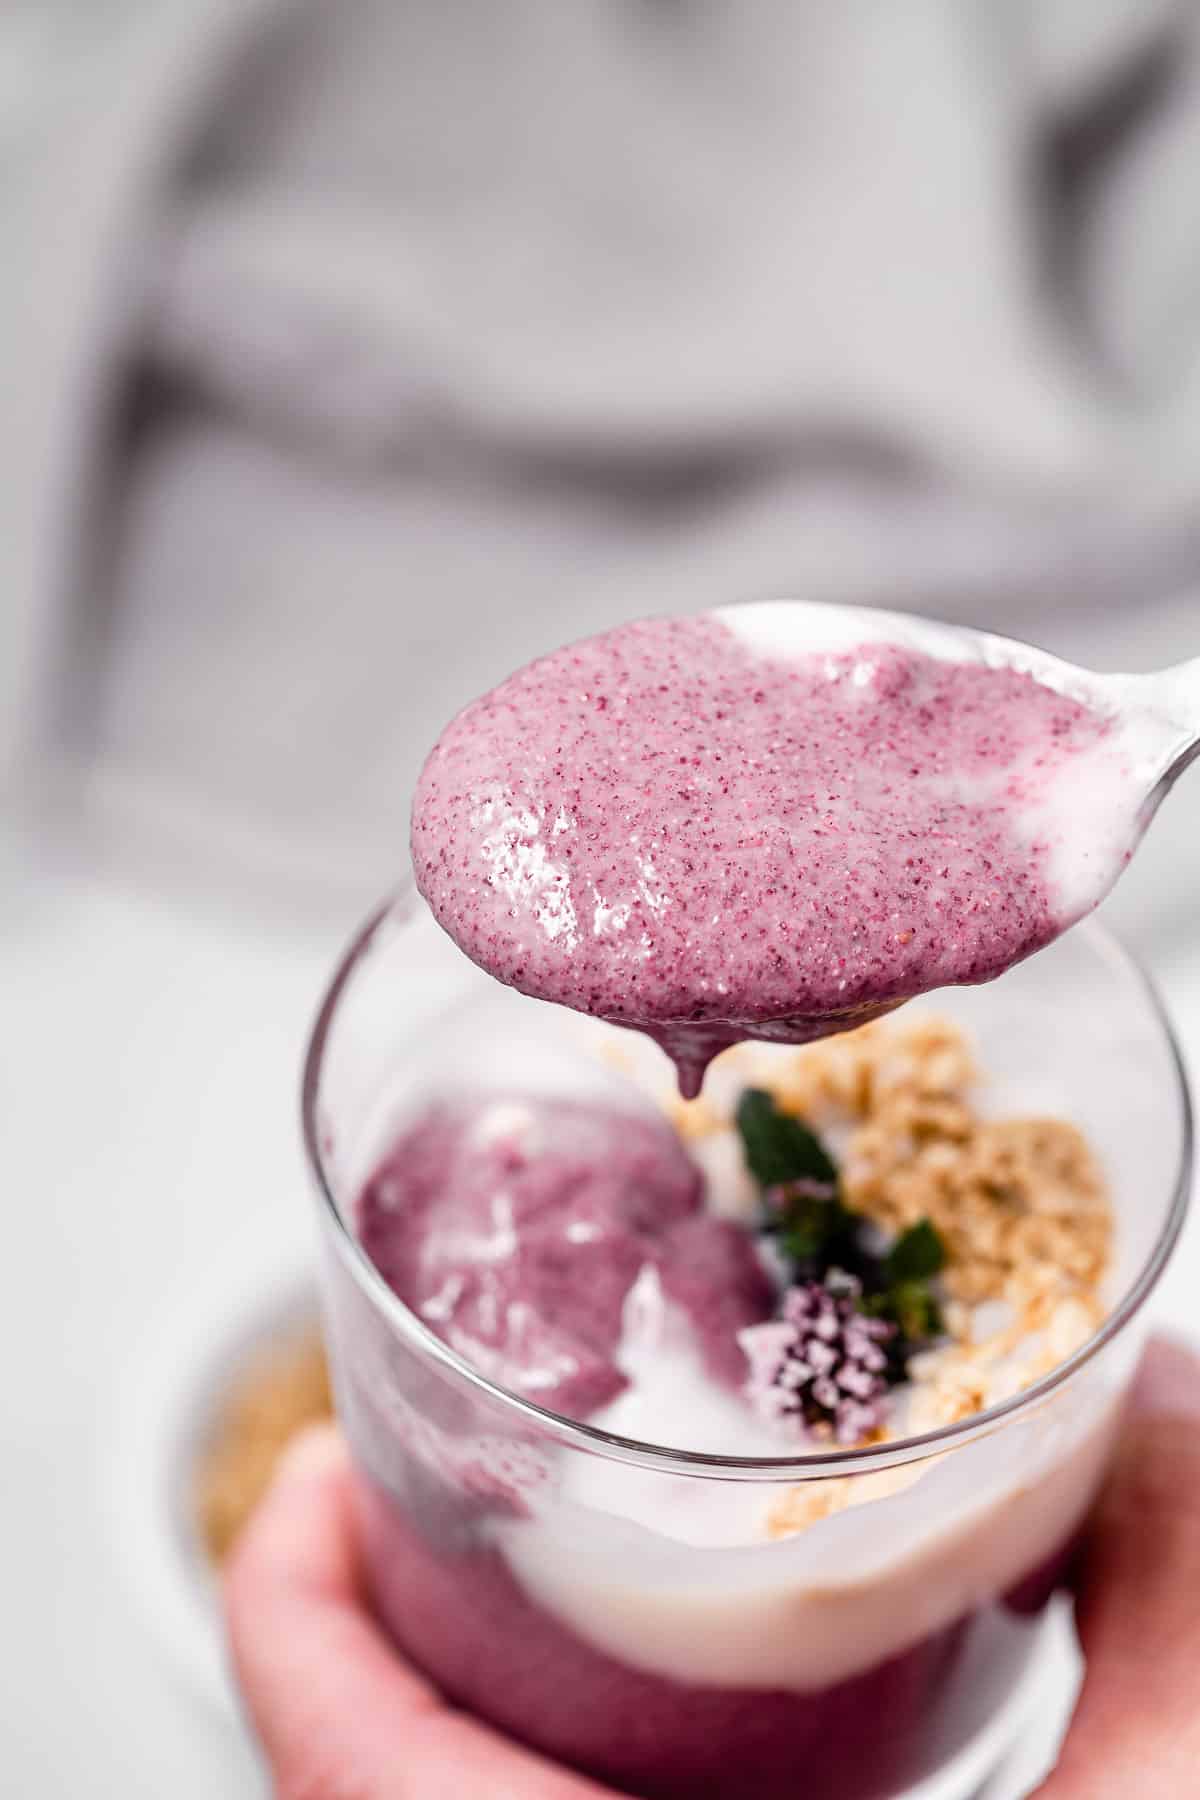 A spoonful of smooth blackberry chia pudding over a glass serving container filled with it.